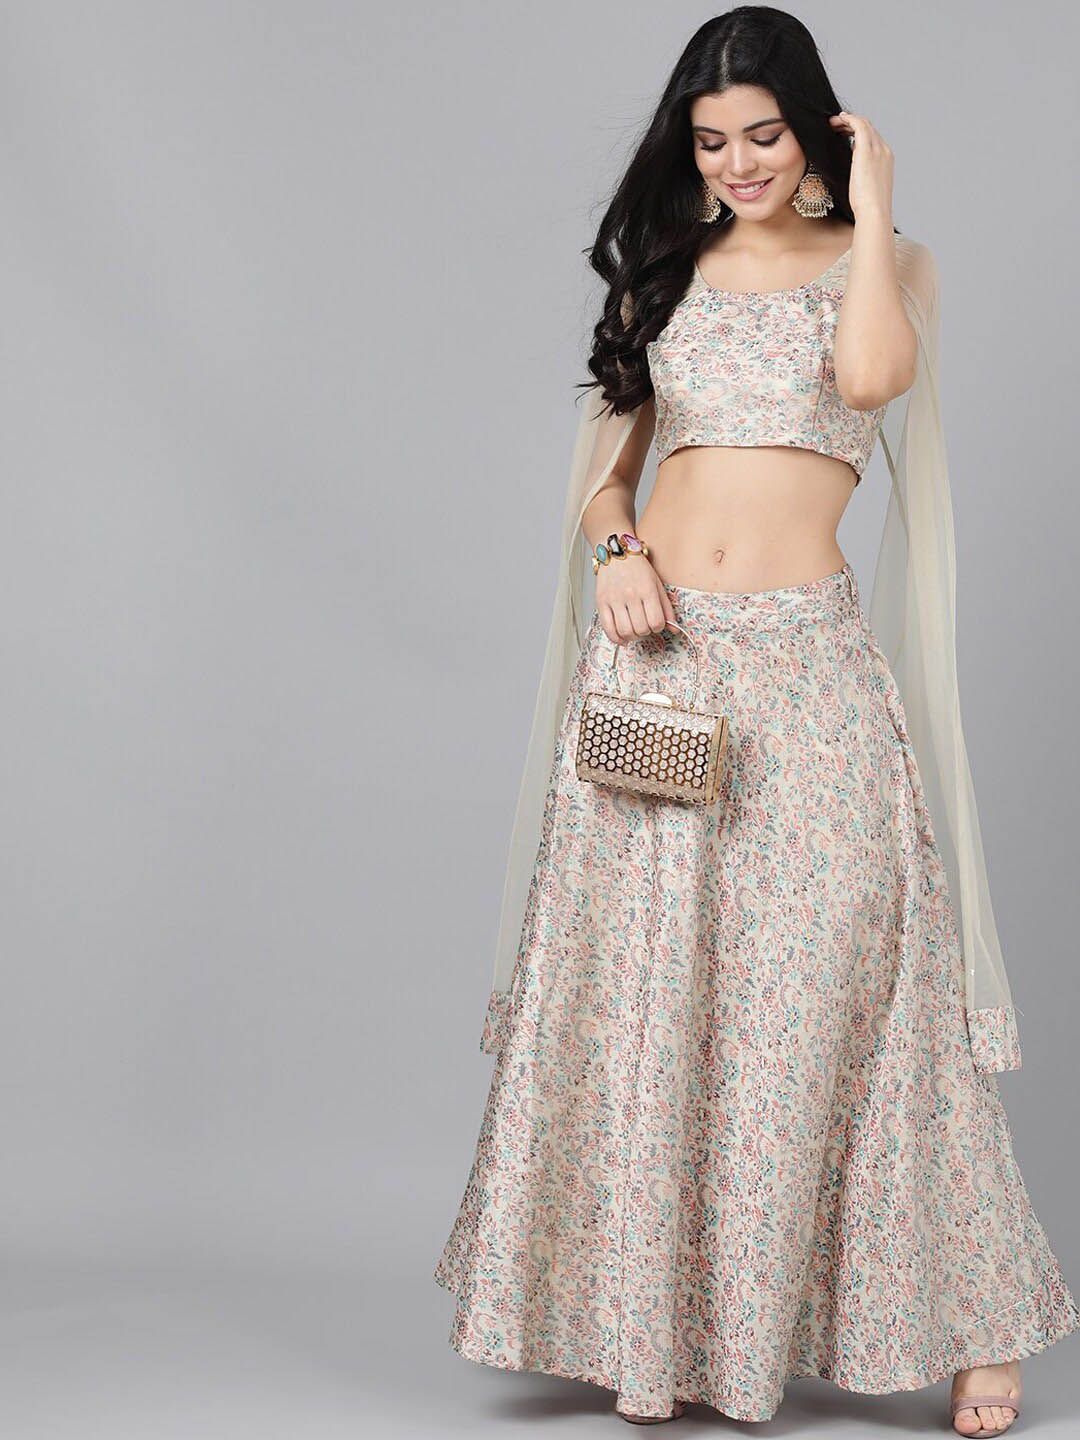 AKS Couture Floral Printed Ready to Wear Lehenga & Blouse With Cape Dupatta Price in India